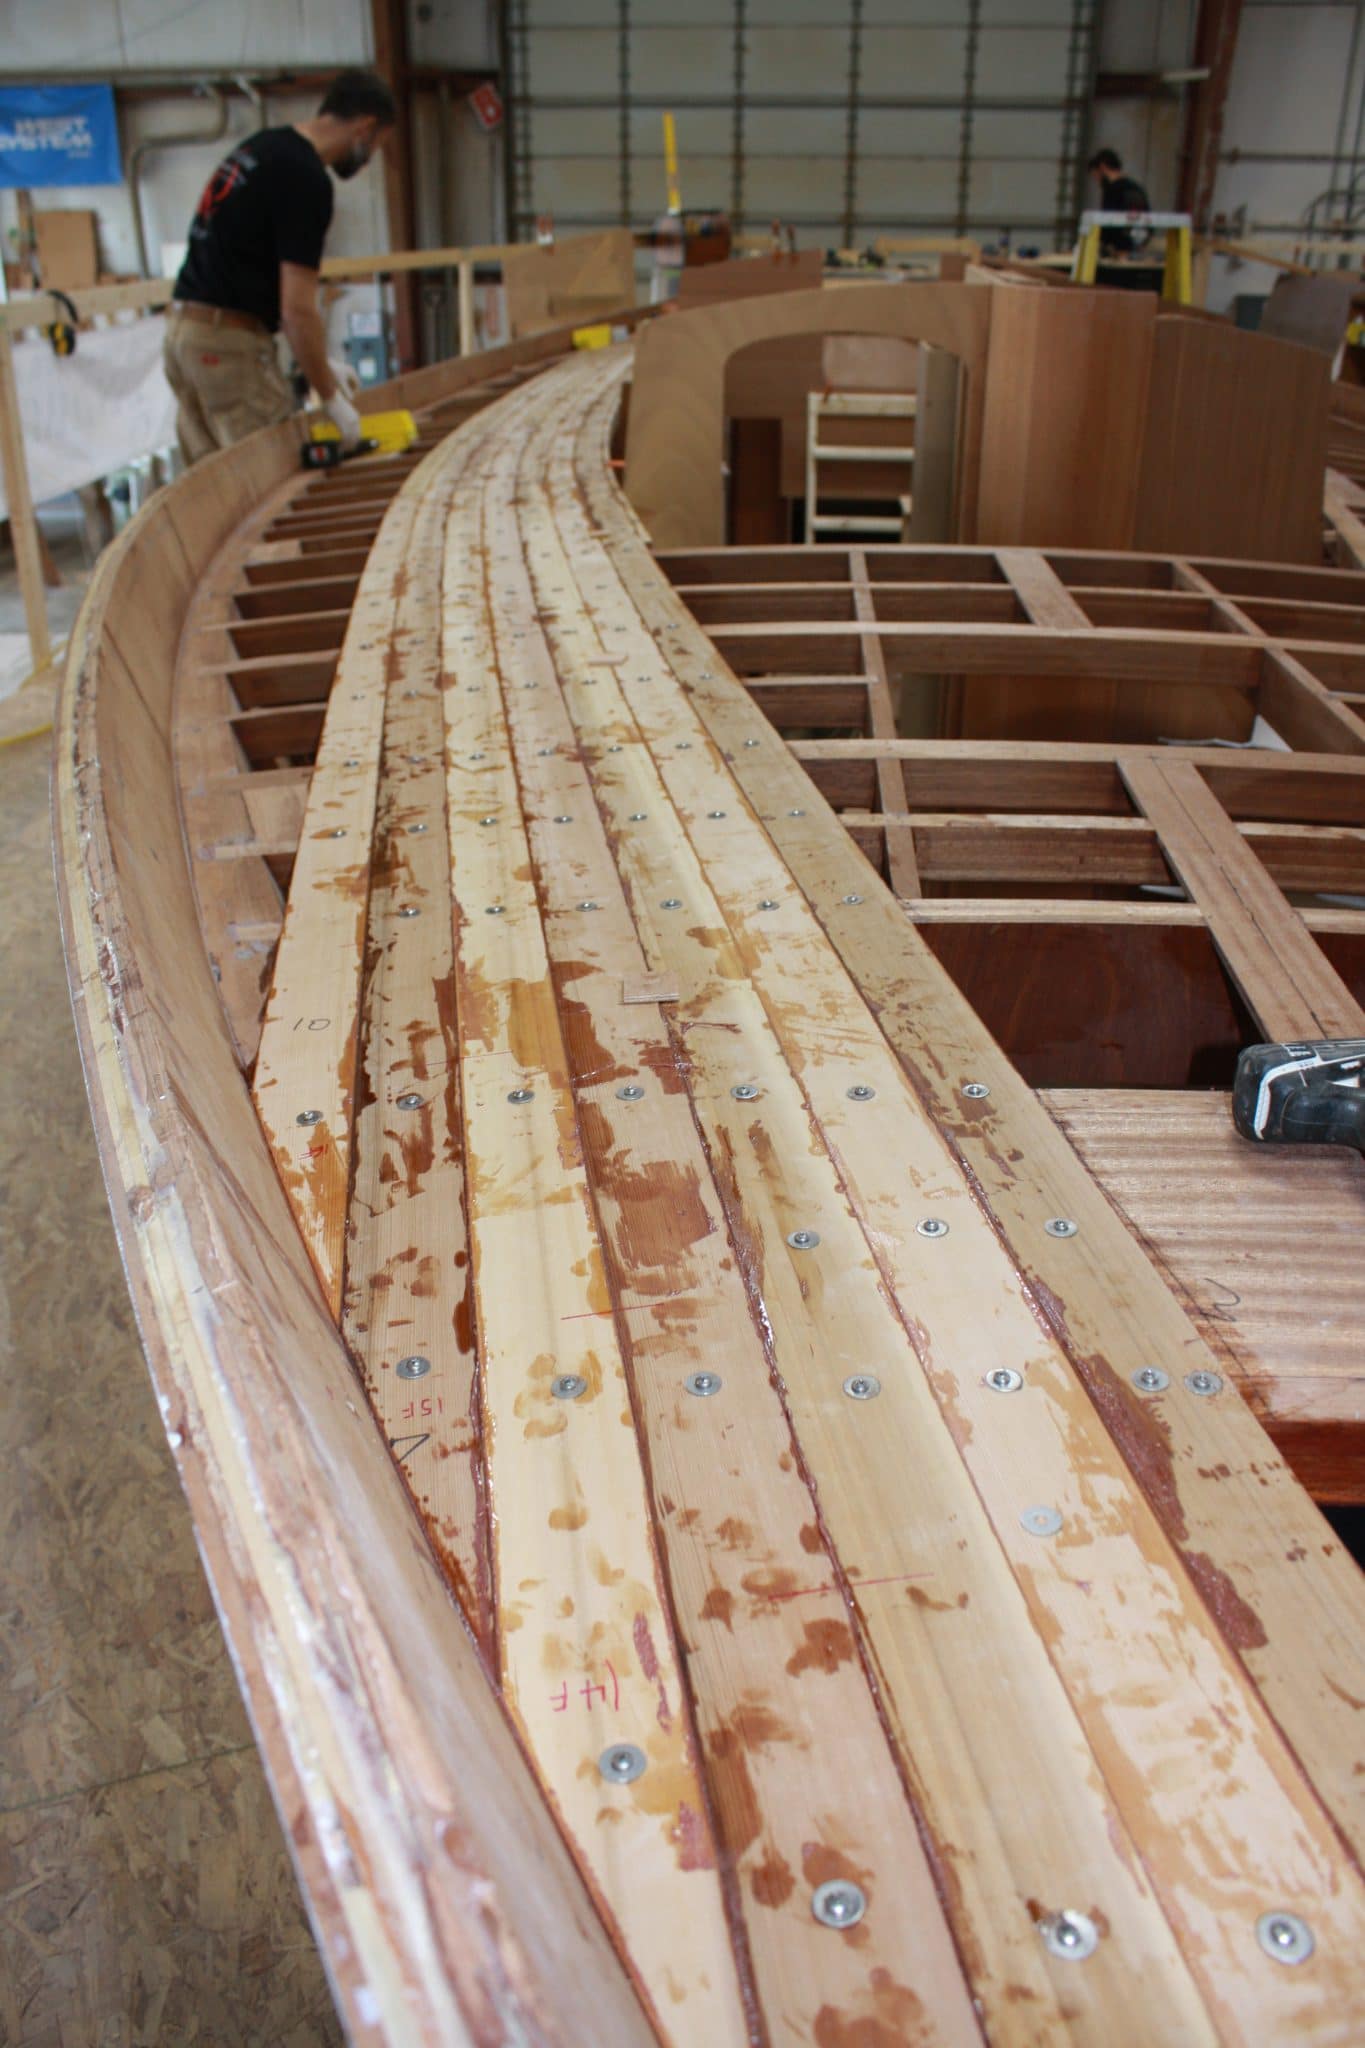 Initial deck planking being installed on Italmas